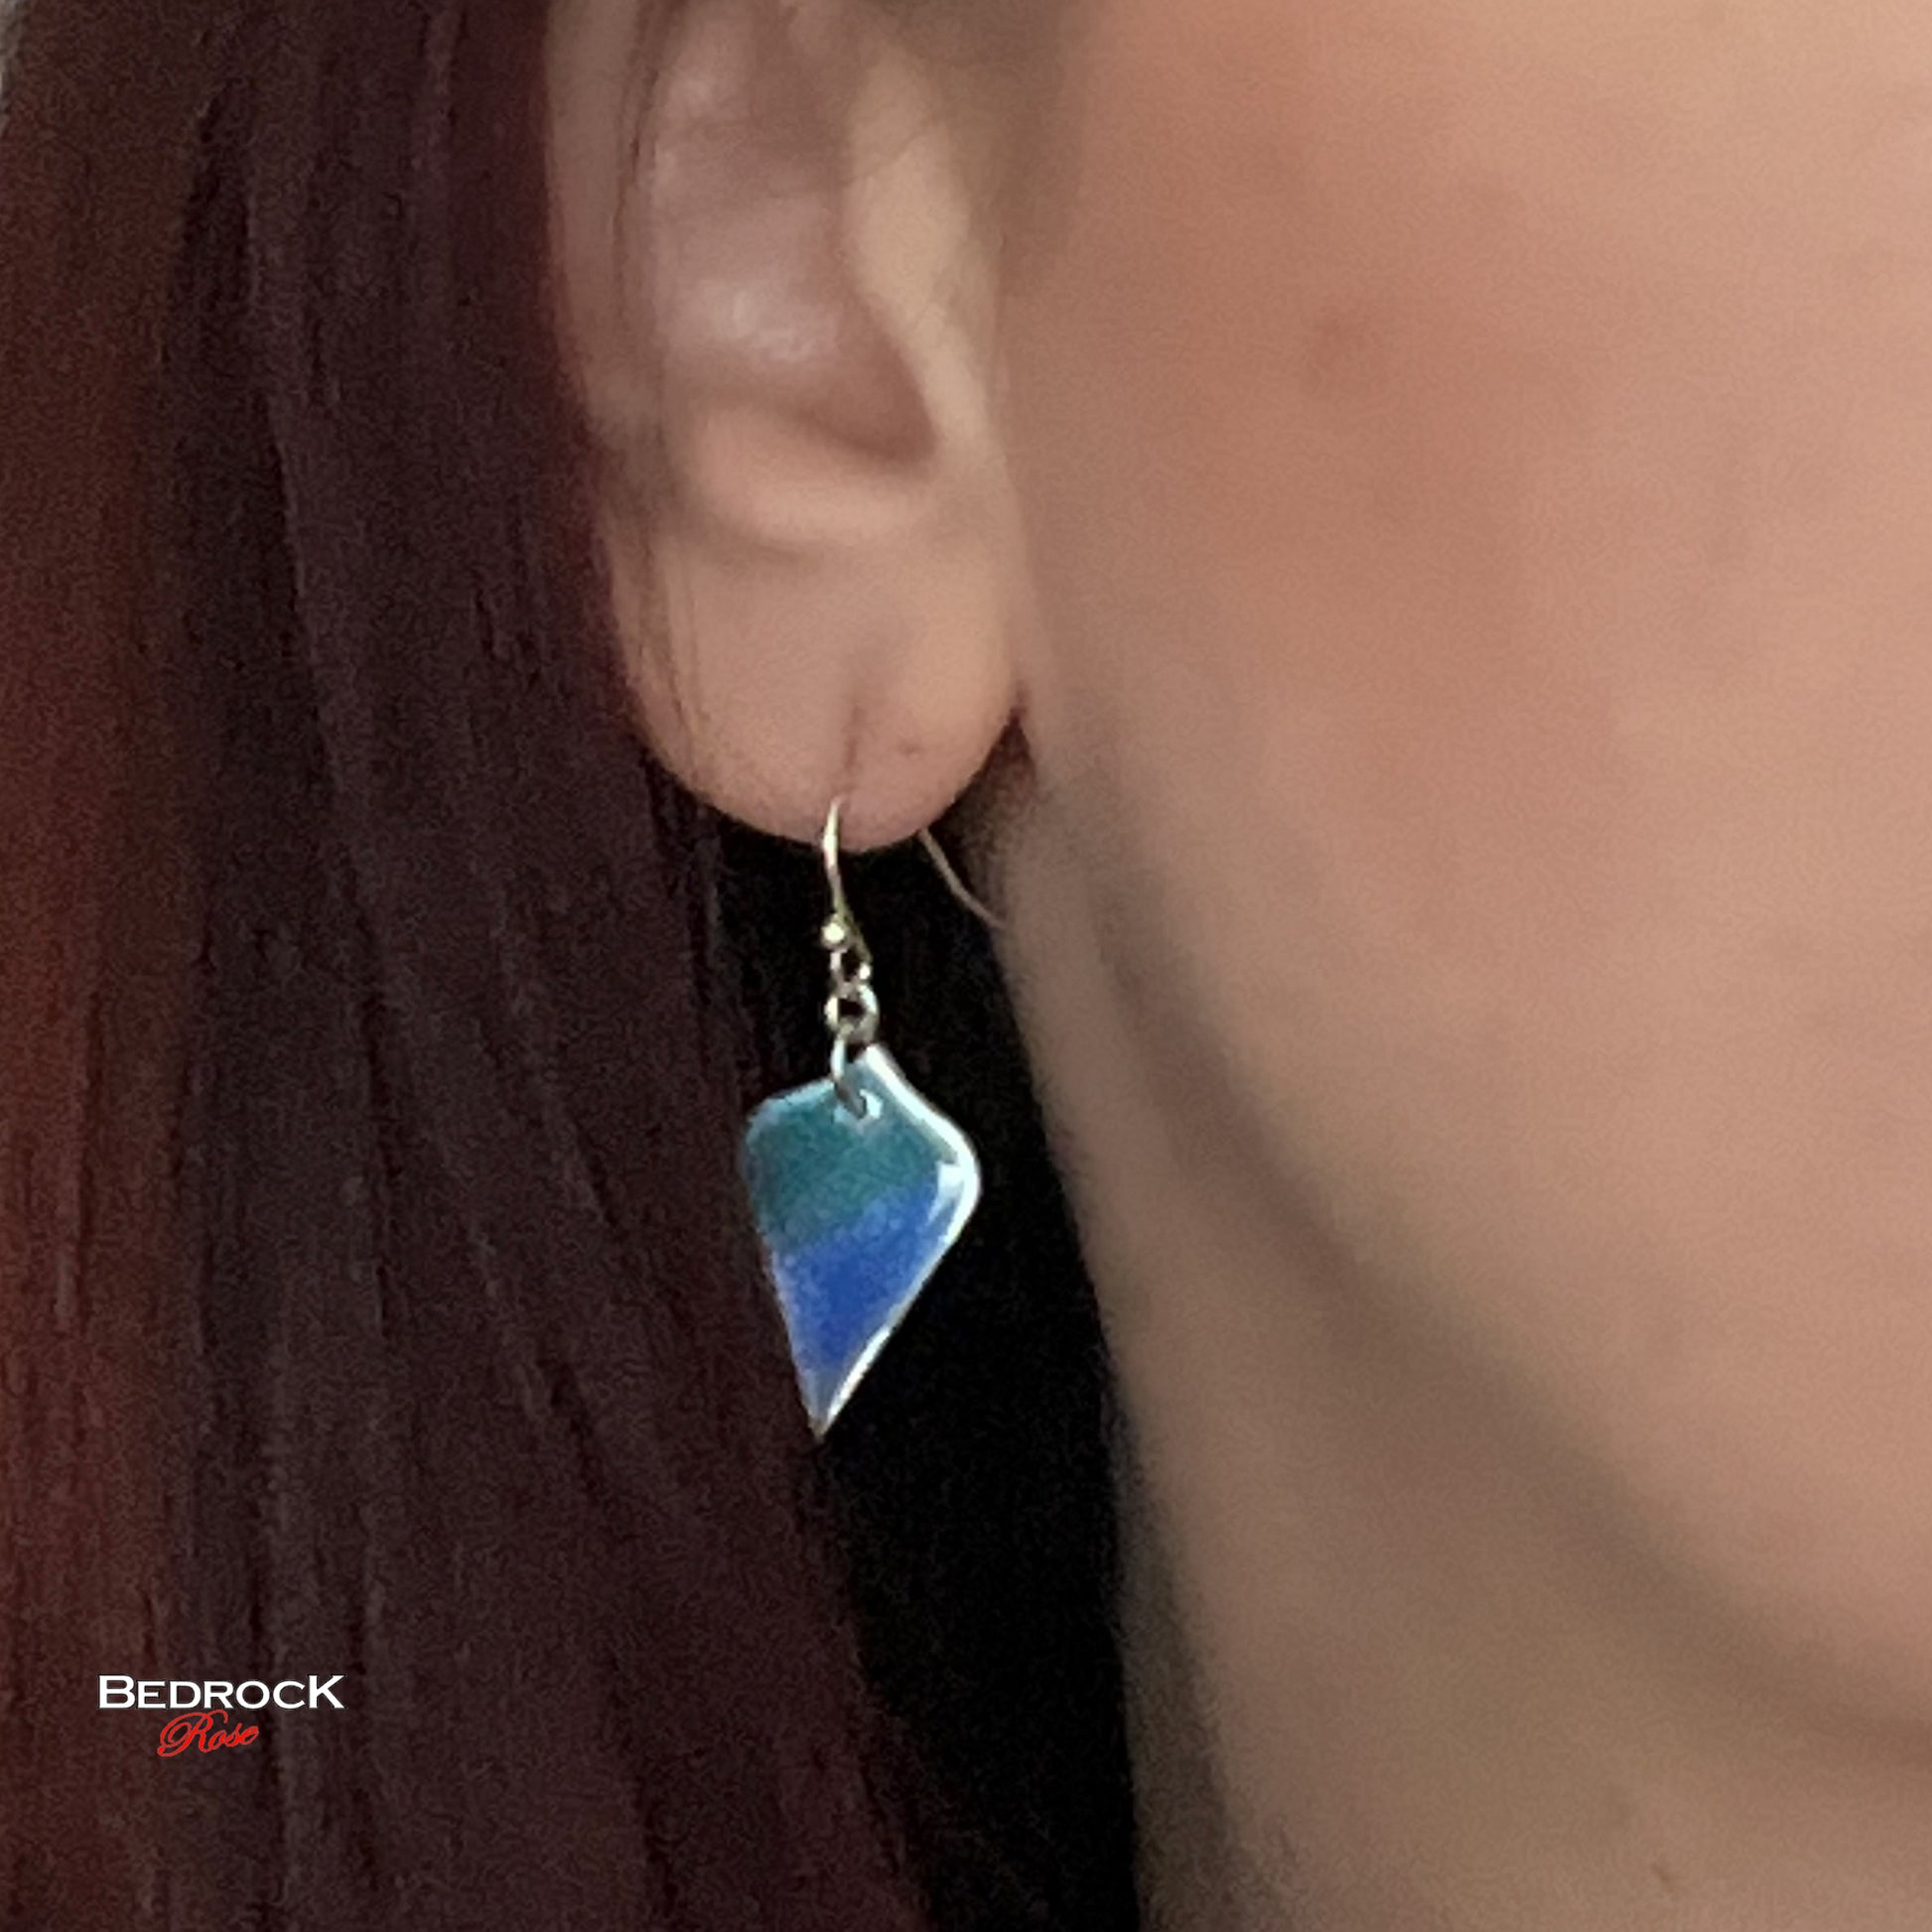 Seahawks Colors Dangling Earrings, Blue and Green enameled on Silver, Game day jewelry, Gift for her